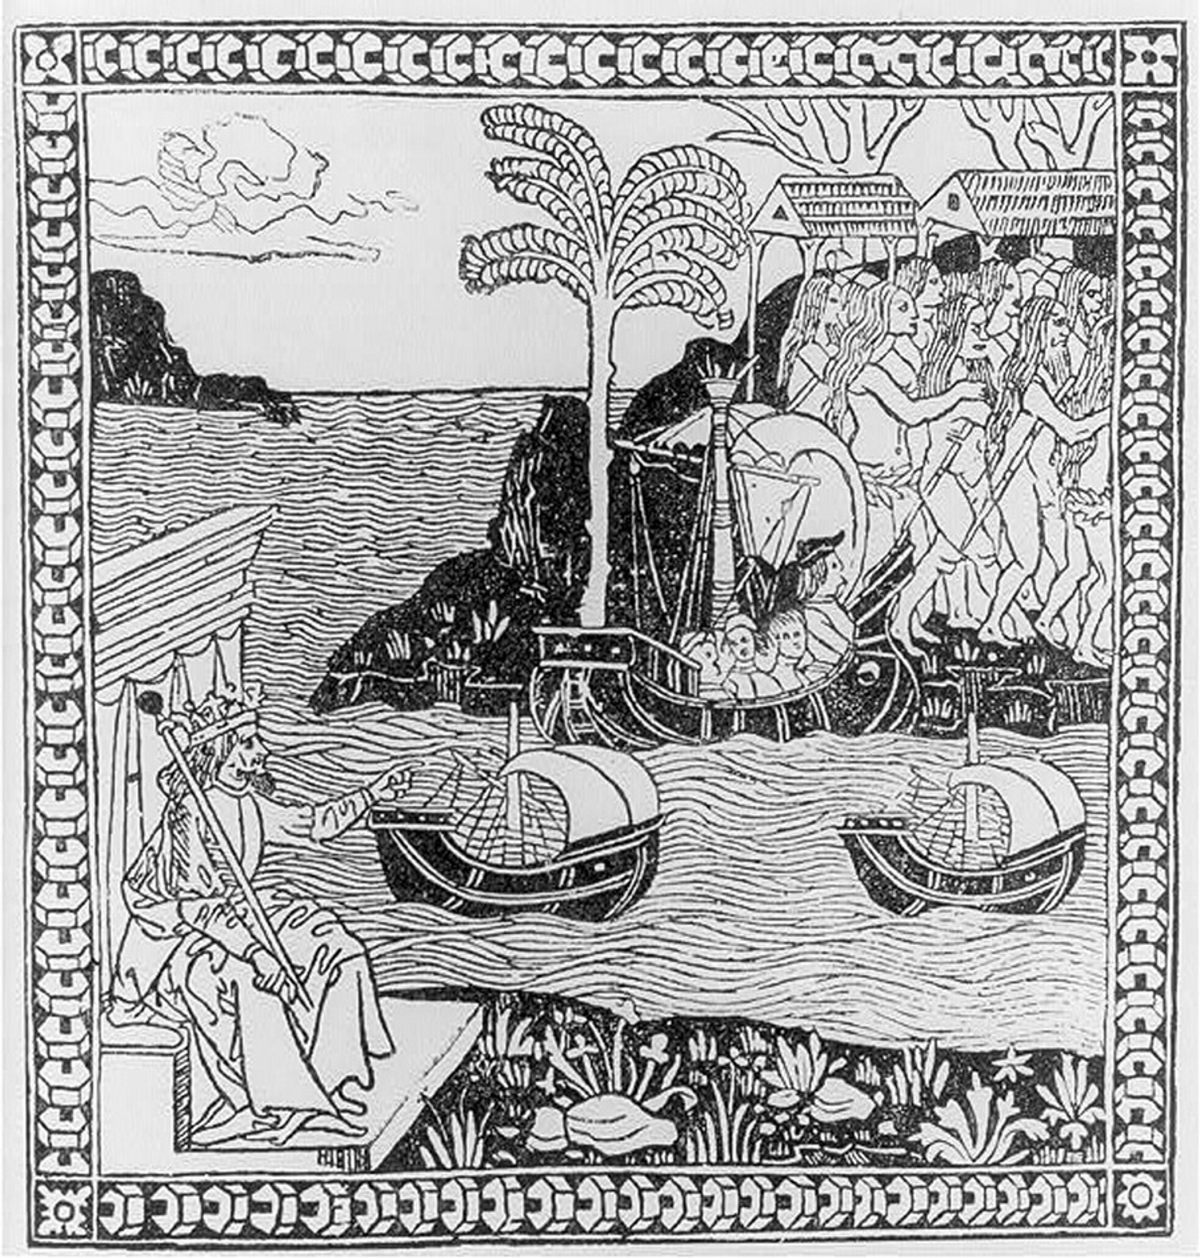 In a woodcut that illustrated an idealized account of Columbus in the Caribbean, Ferdinand II, the king of Spain, points to Columbus and his ships; a queen conch shell lies at the king's feet.